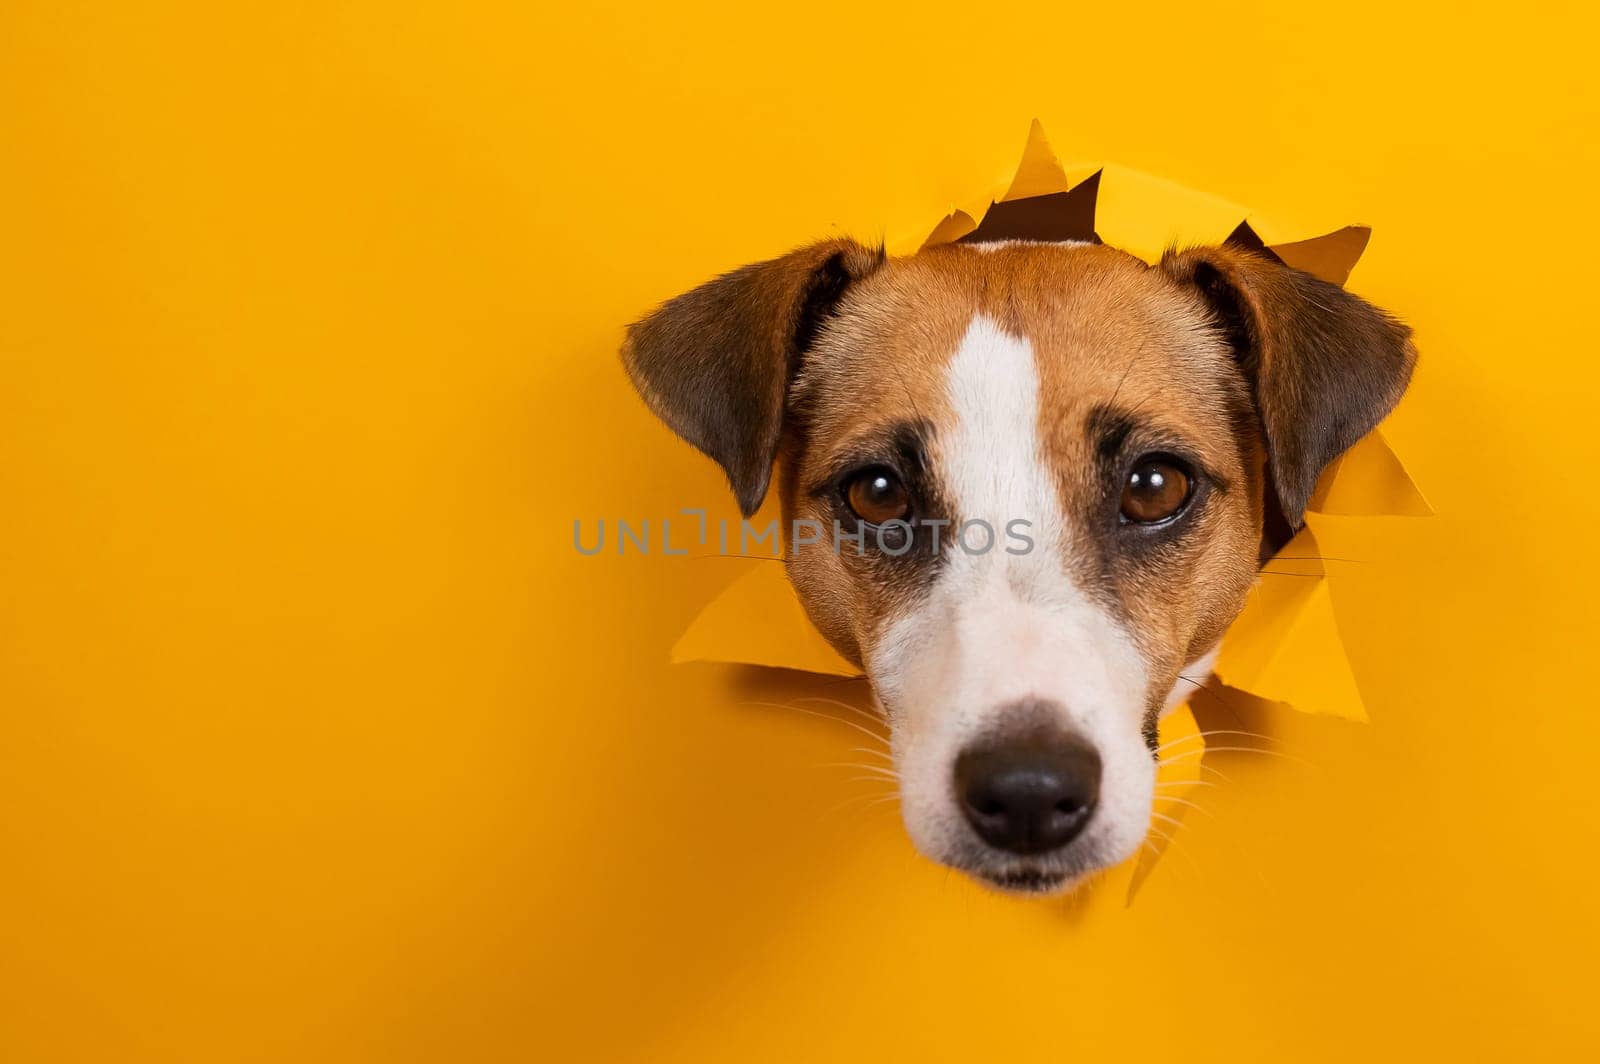 Funny dog jack russell terrier leans out of a hole in a paper orange background